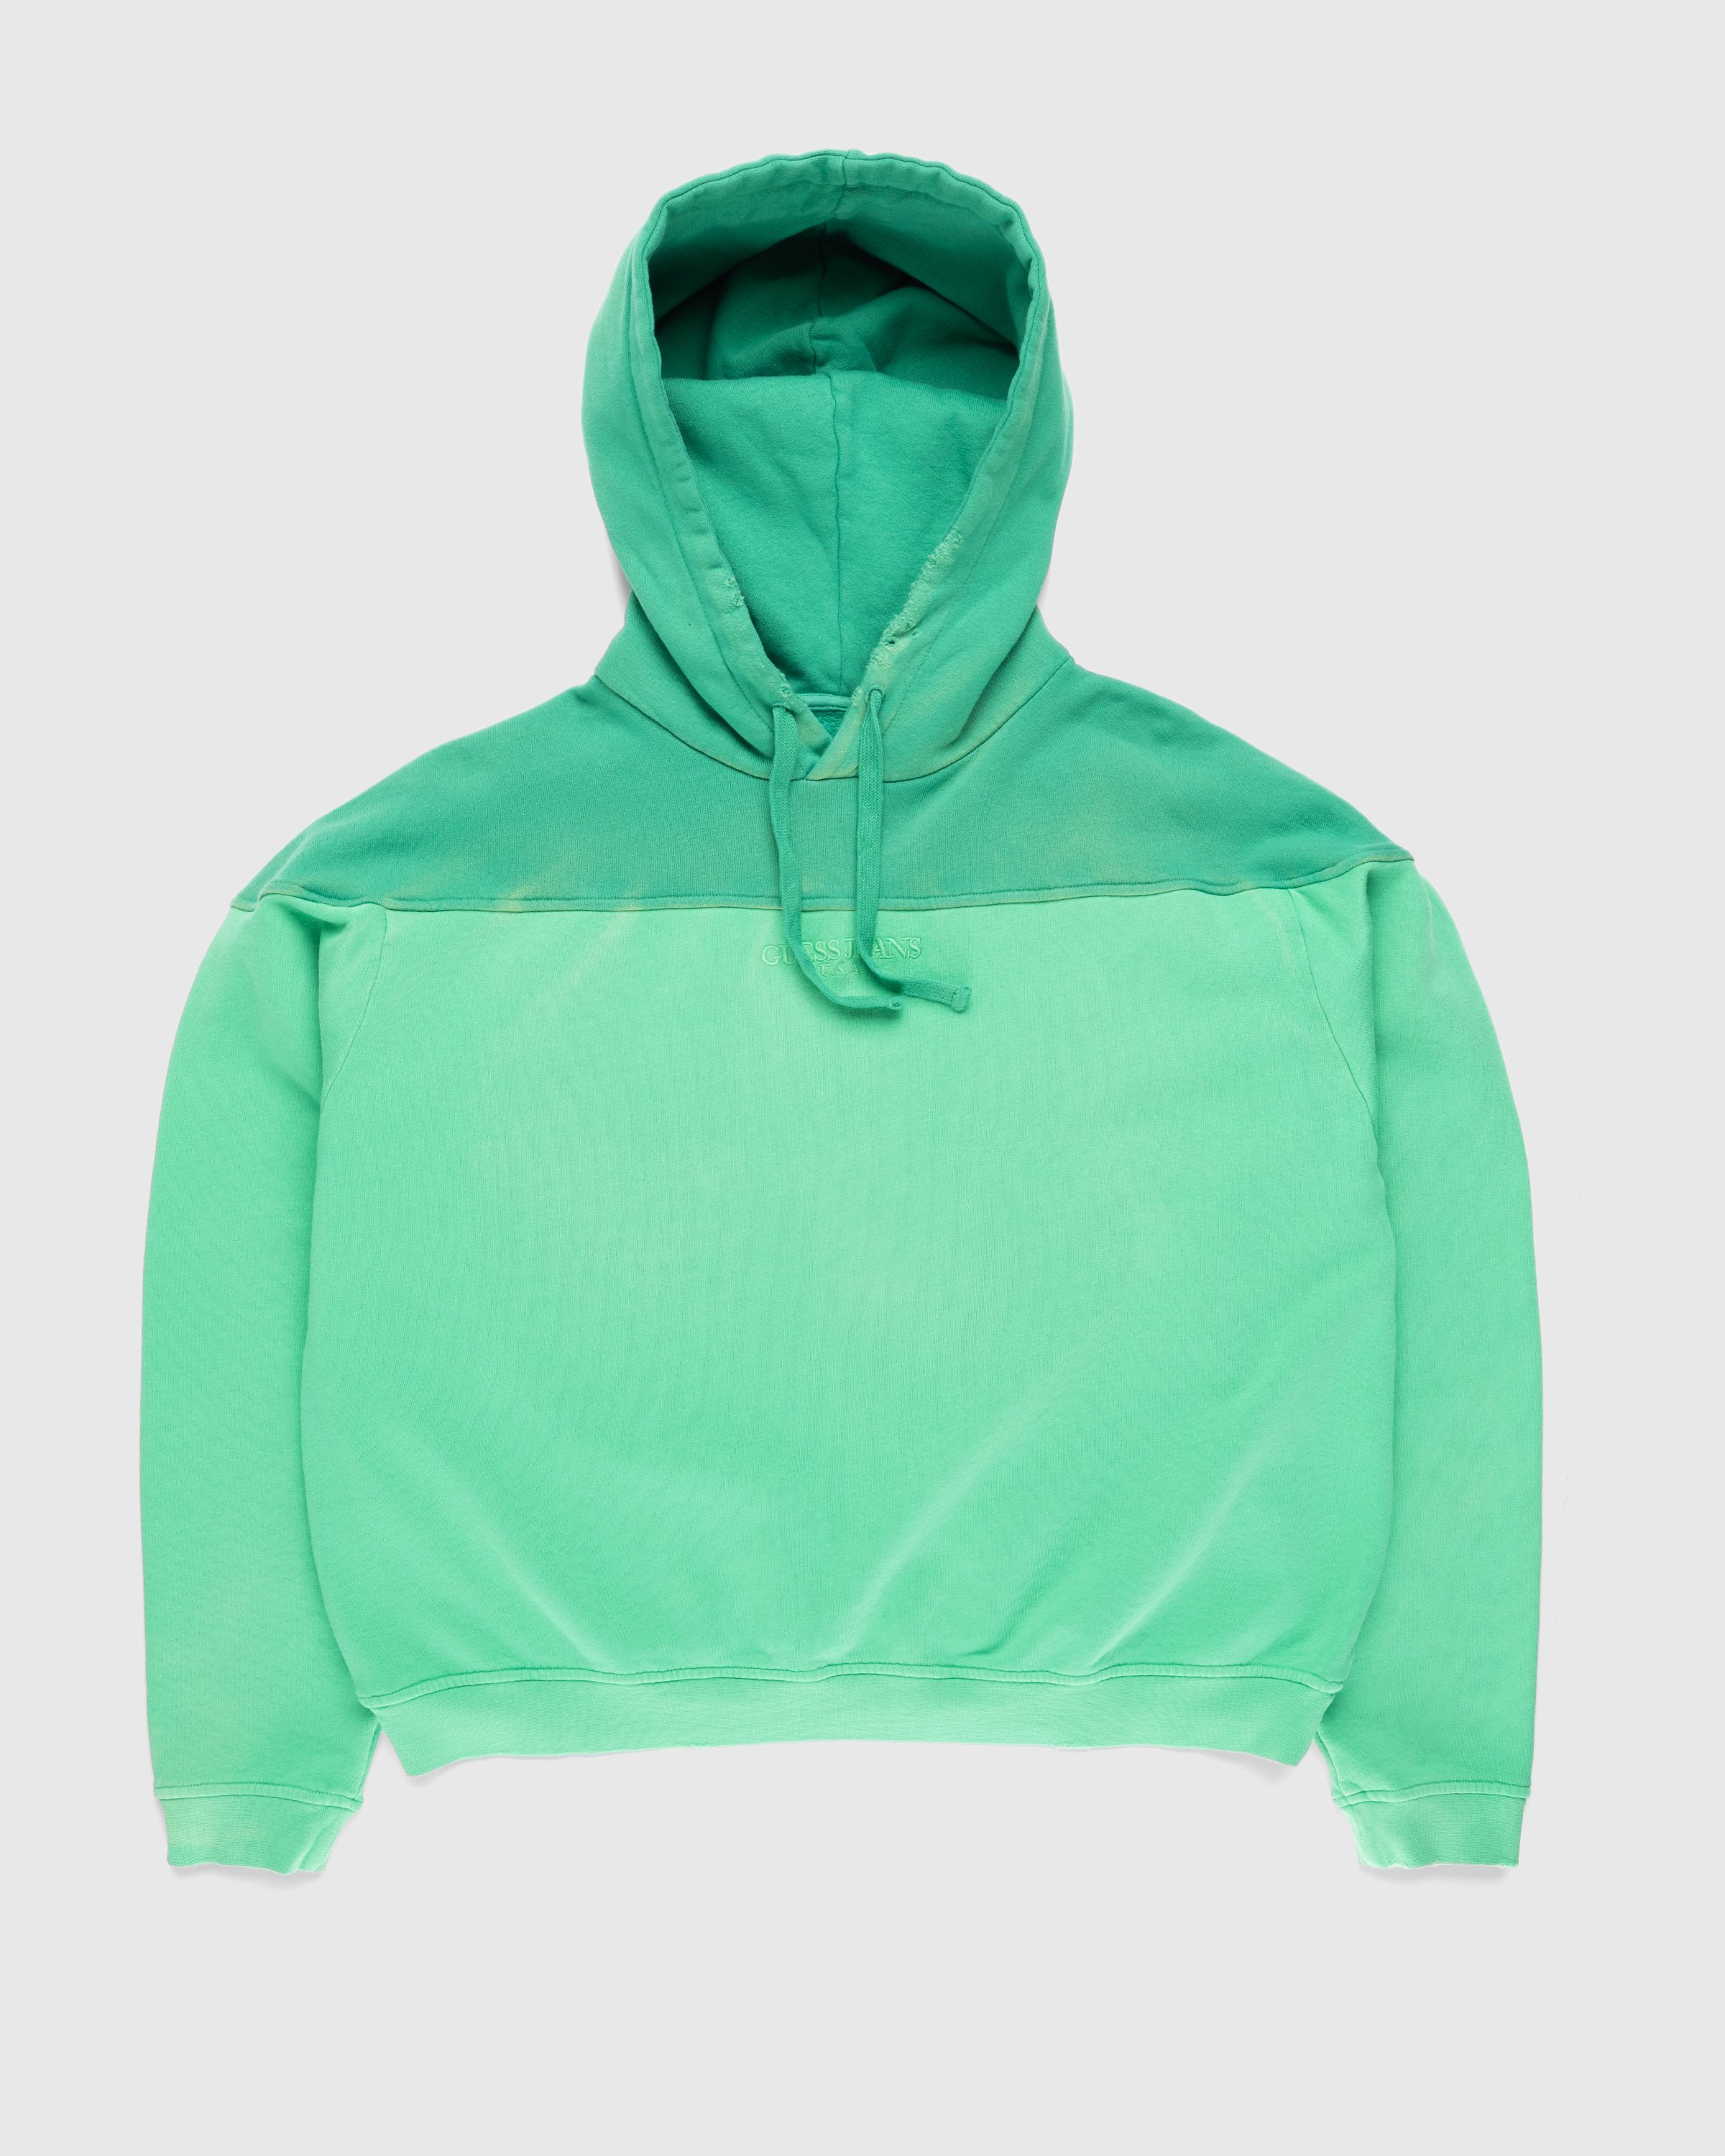 Guess USA - Two-Tone Hoodie Honeydew - Clothing - Green - Image 1